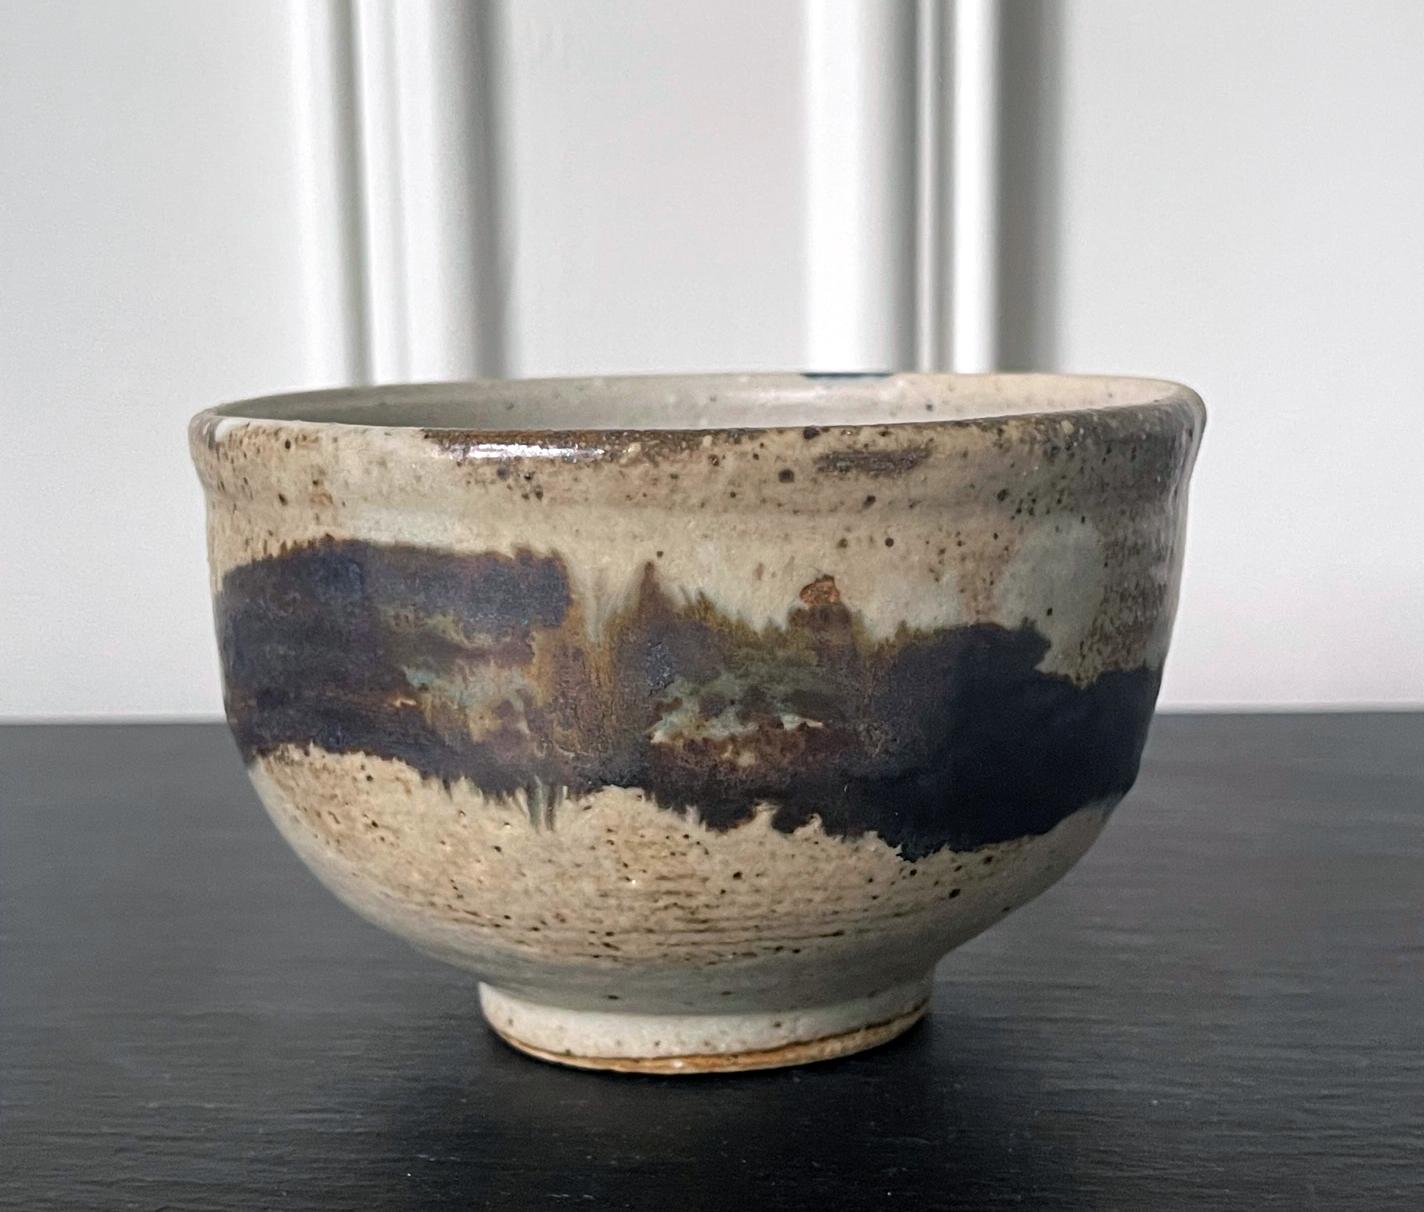 A glazed ceramic tea bowl (chawan) by Japanese American artist Toshiko Takaezu (American, 1922 - 2011). The well-balanced form is hand built and shows slight irregularity, further accentuated with wheel grooves circumventing the exterior. The